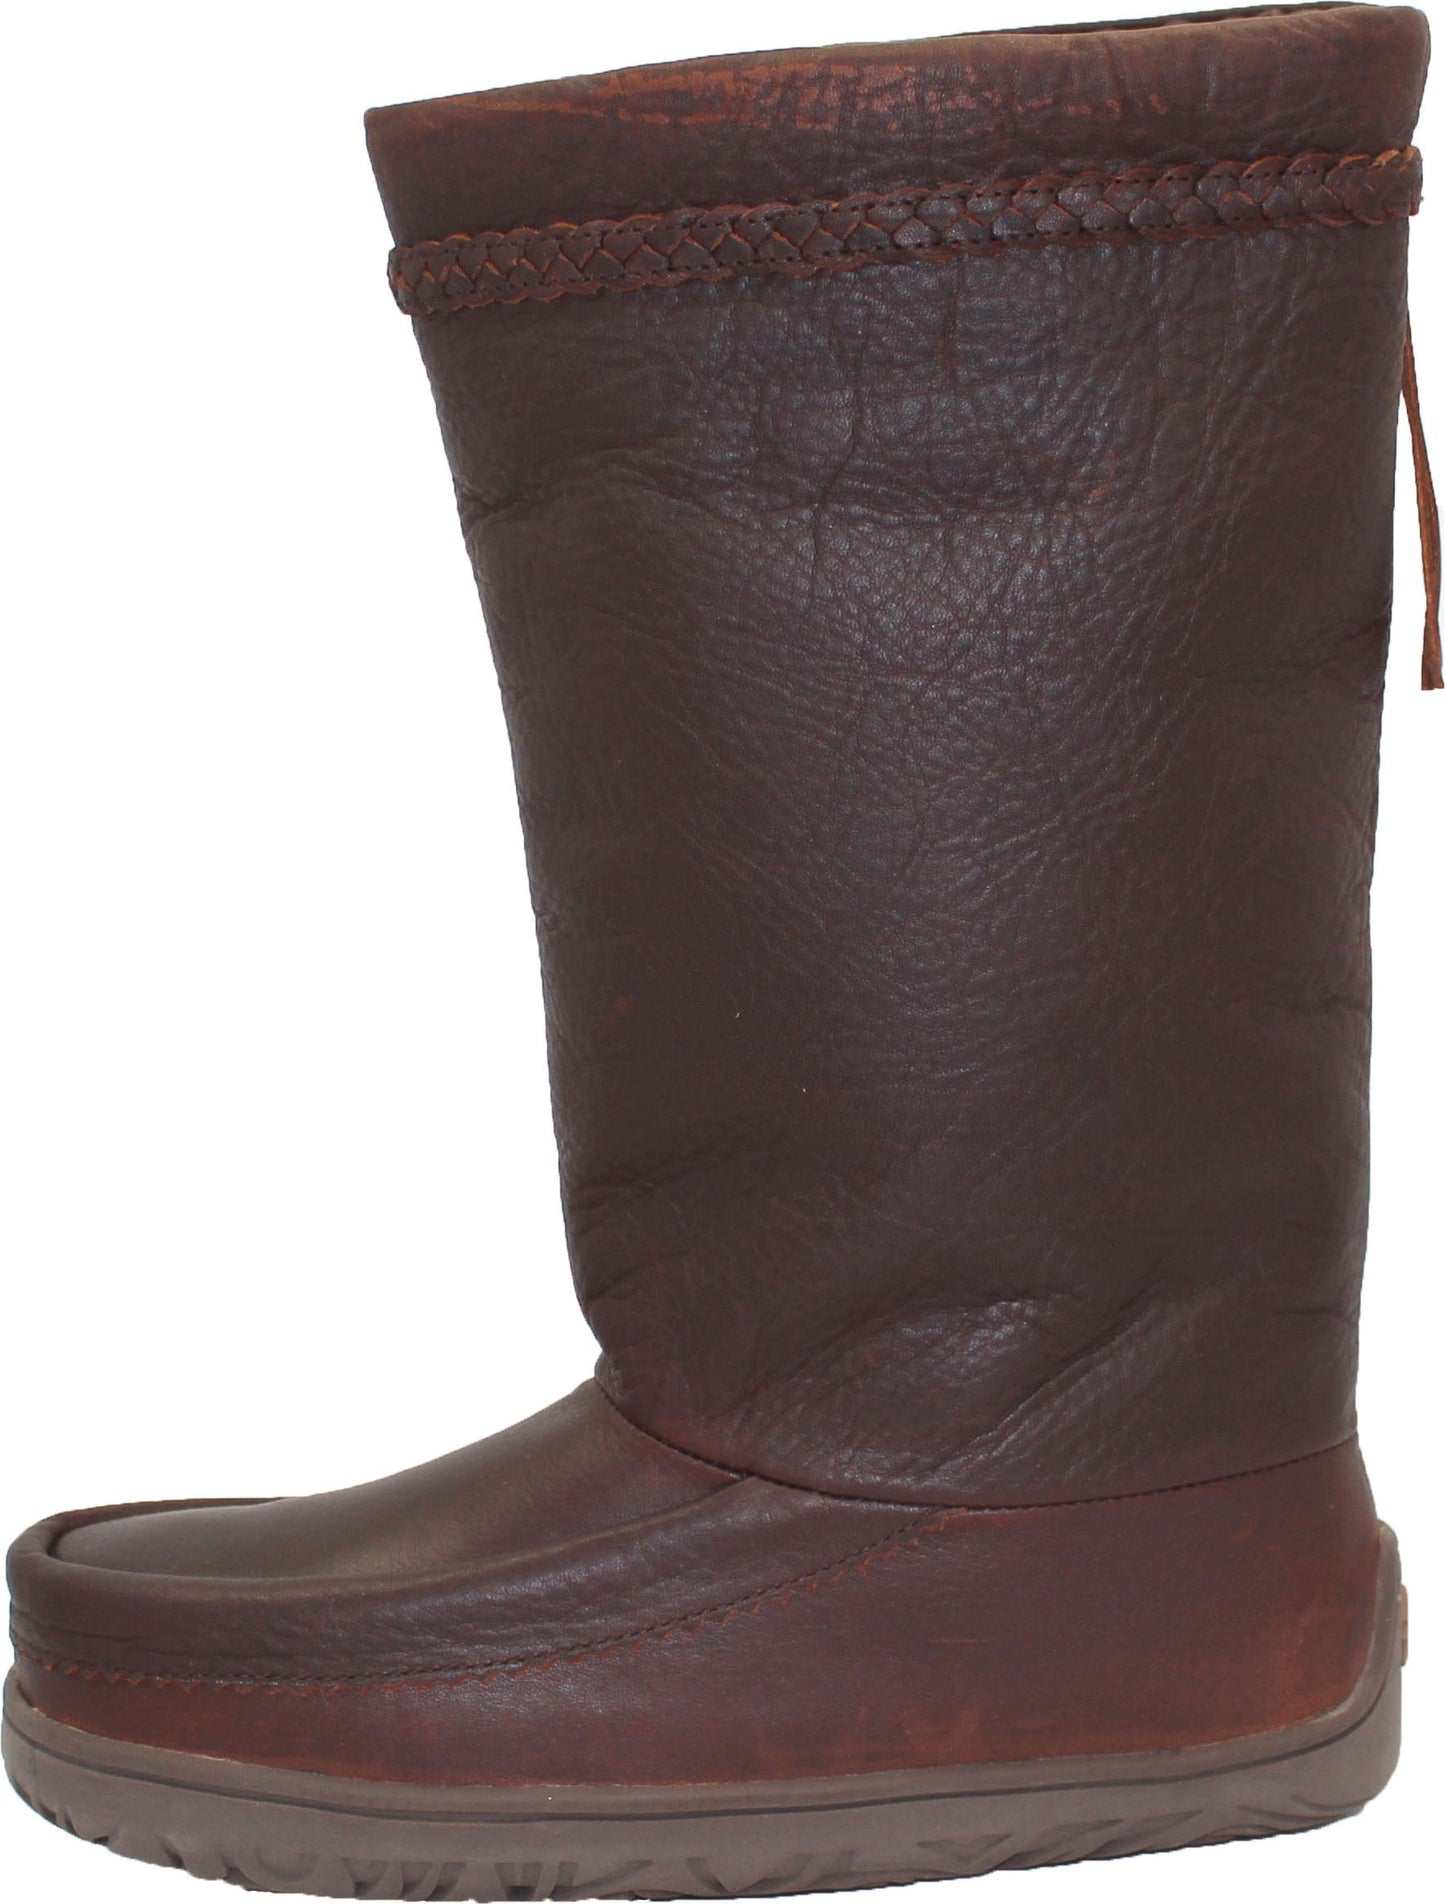 Urban Trail Boots Tall Waterproof Brown All Leather Mukluk